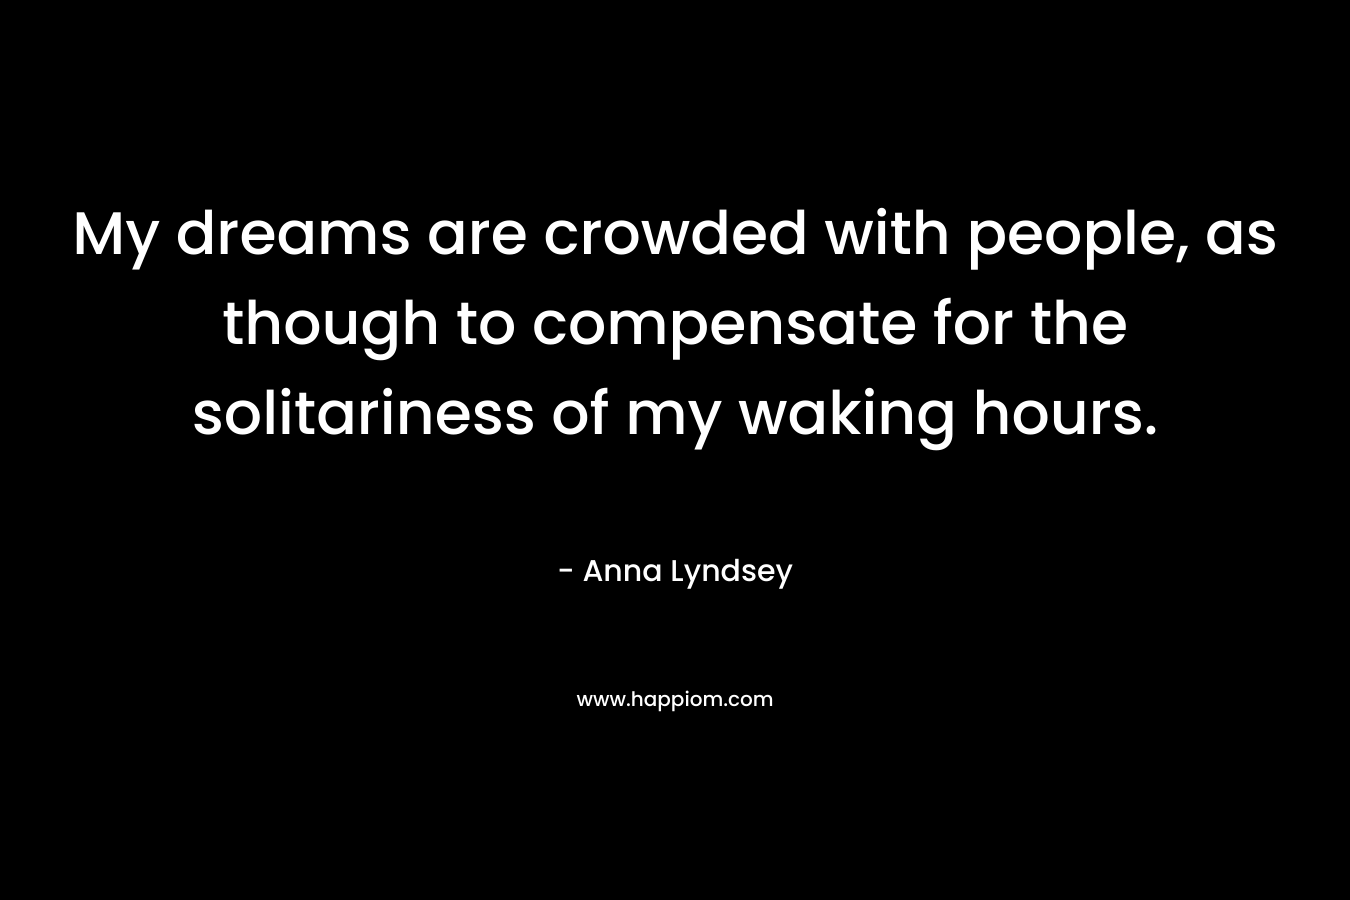 My dreams are crowded with people, as though to compensate for the solitariness of my waking hours. – Anna Lyndsey